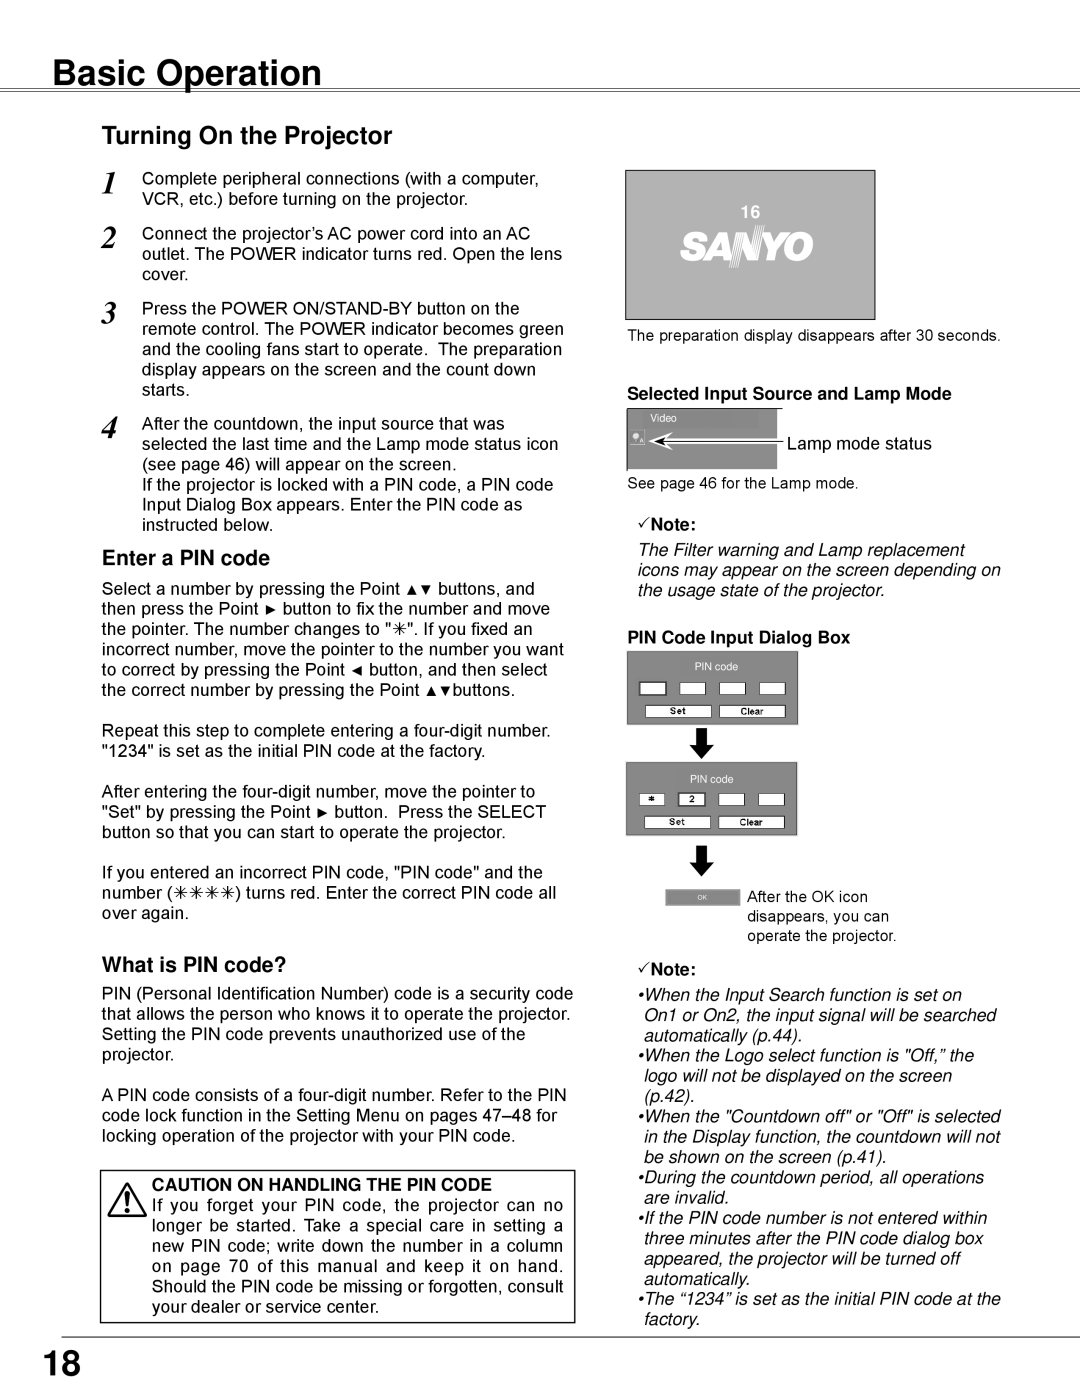 Sanyo PLC-WXE45 owner manual Basic Operation, Turning On the Projector, Enter a PIN code, What is PIN code?, Note 